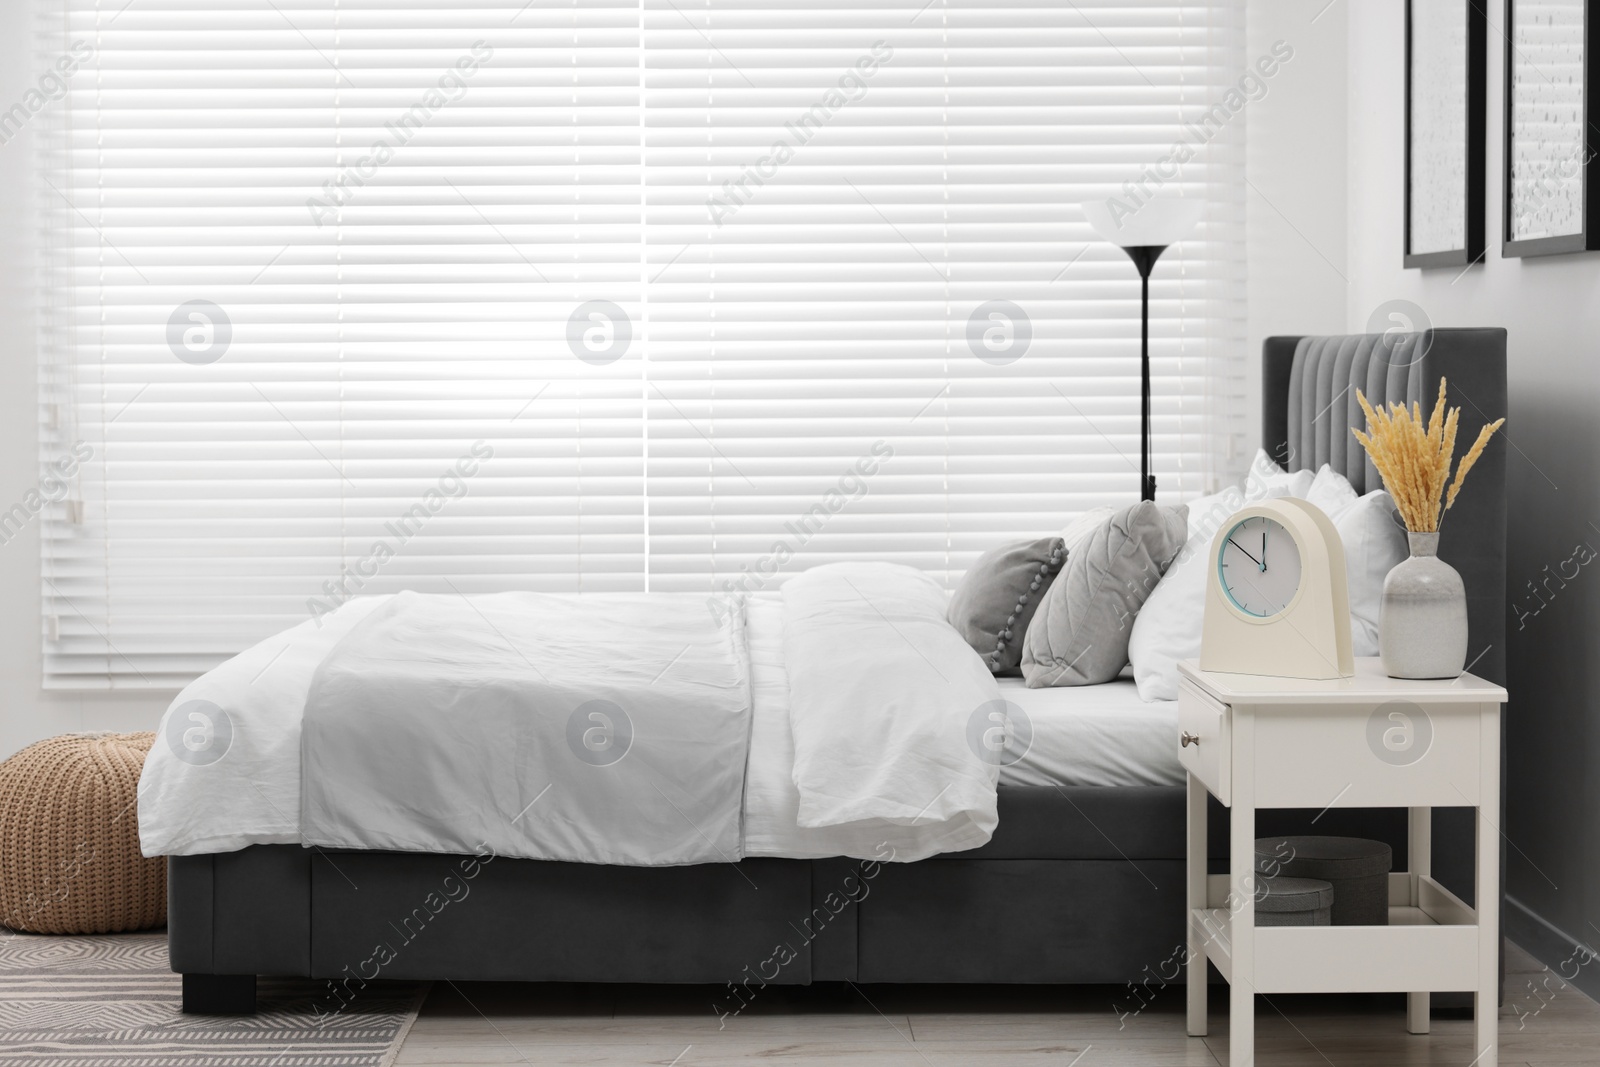 Photo of Stylish bedroom interior with large bed, bedside table and lamp